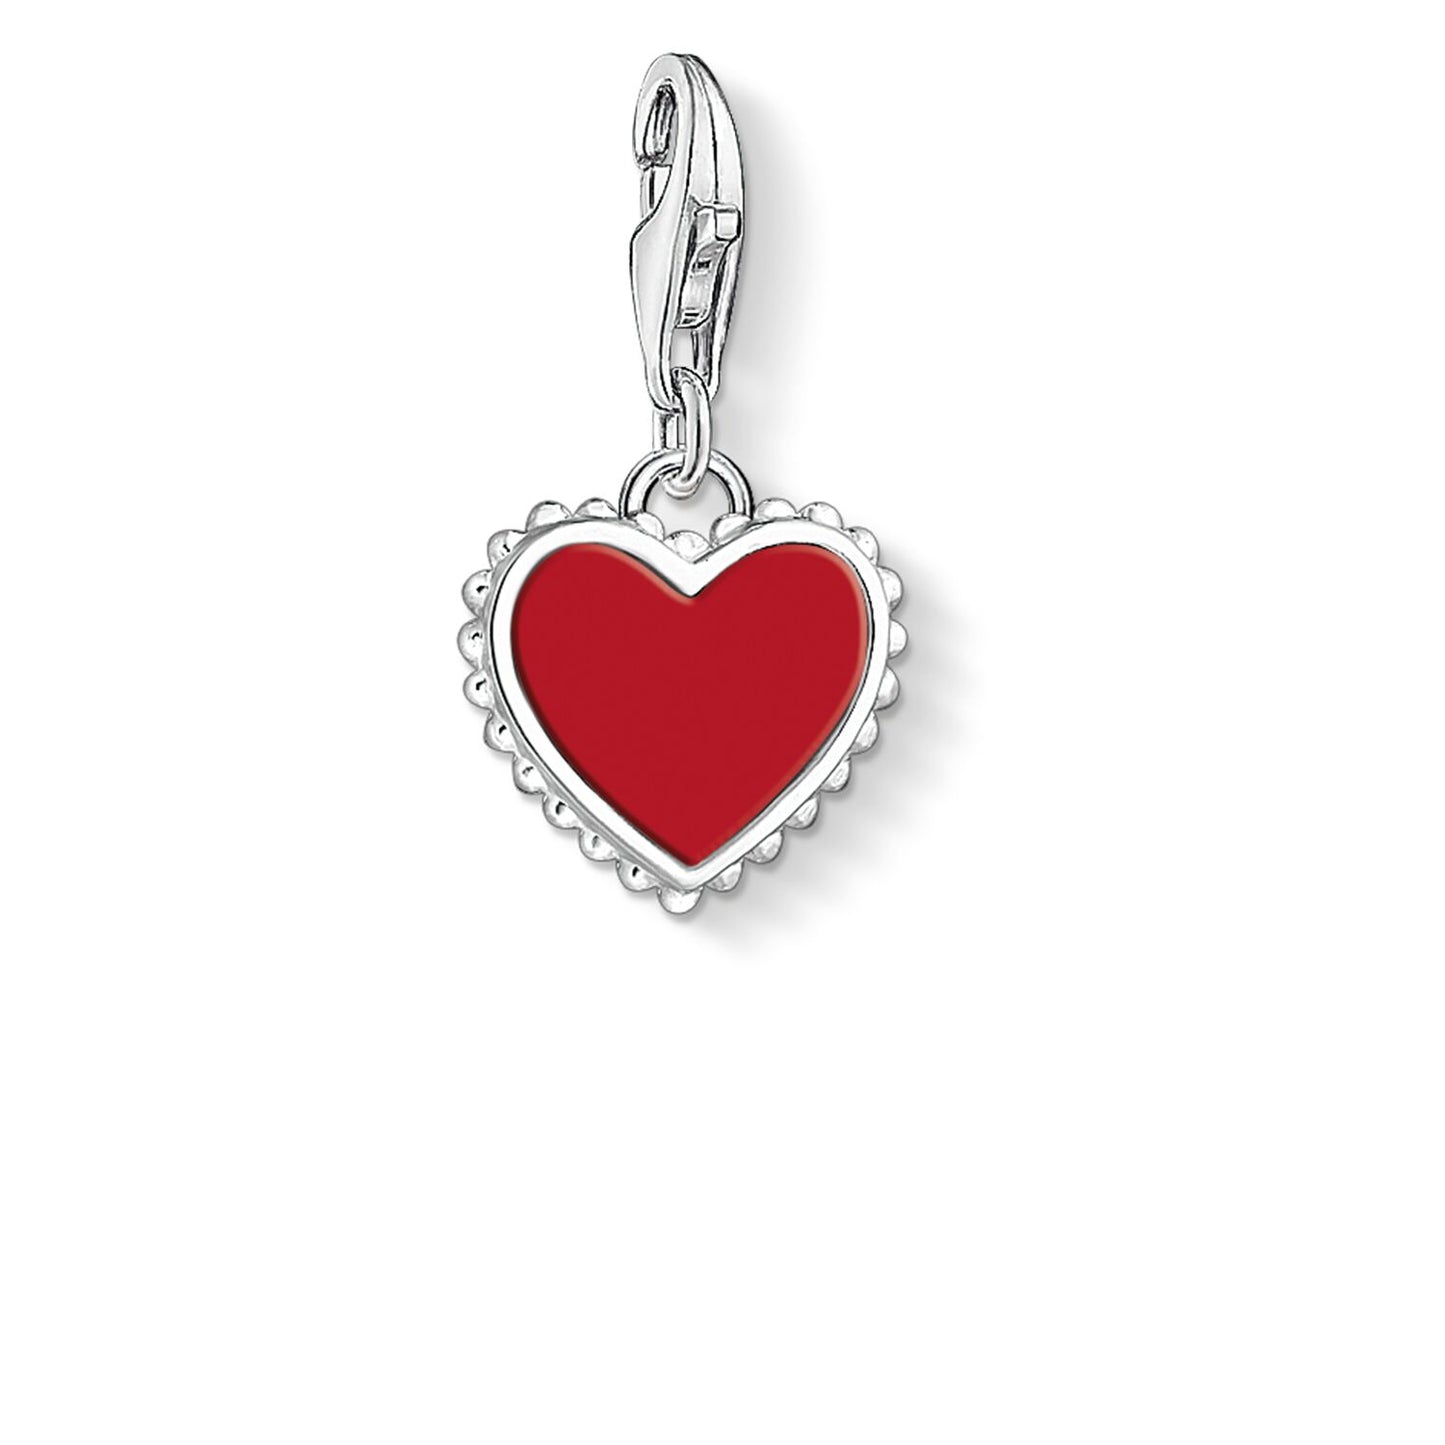 CHARM CLUB STERLING SILVER RED HEART CHARM